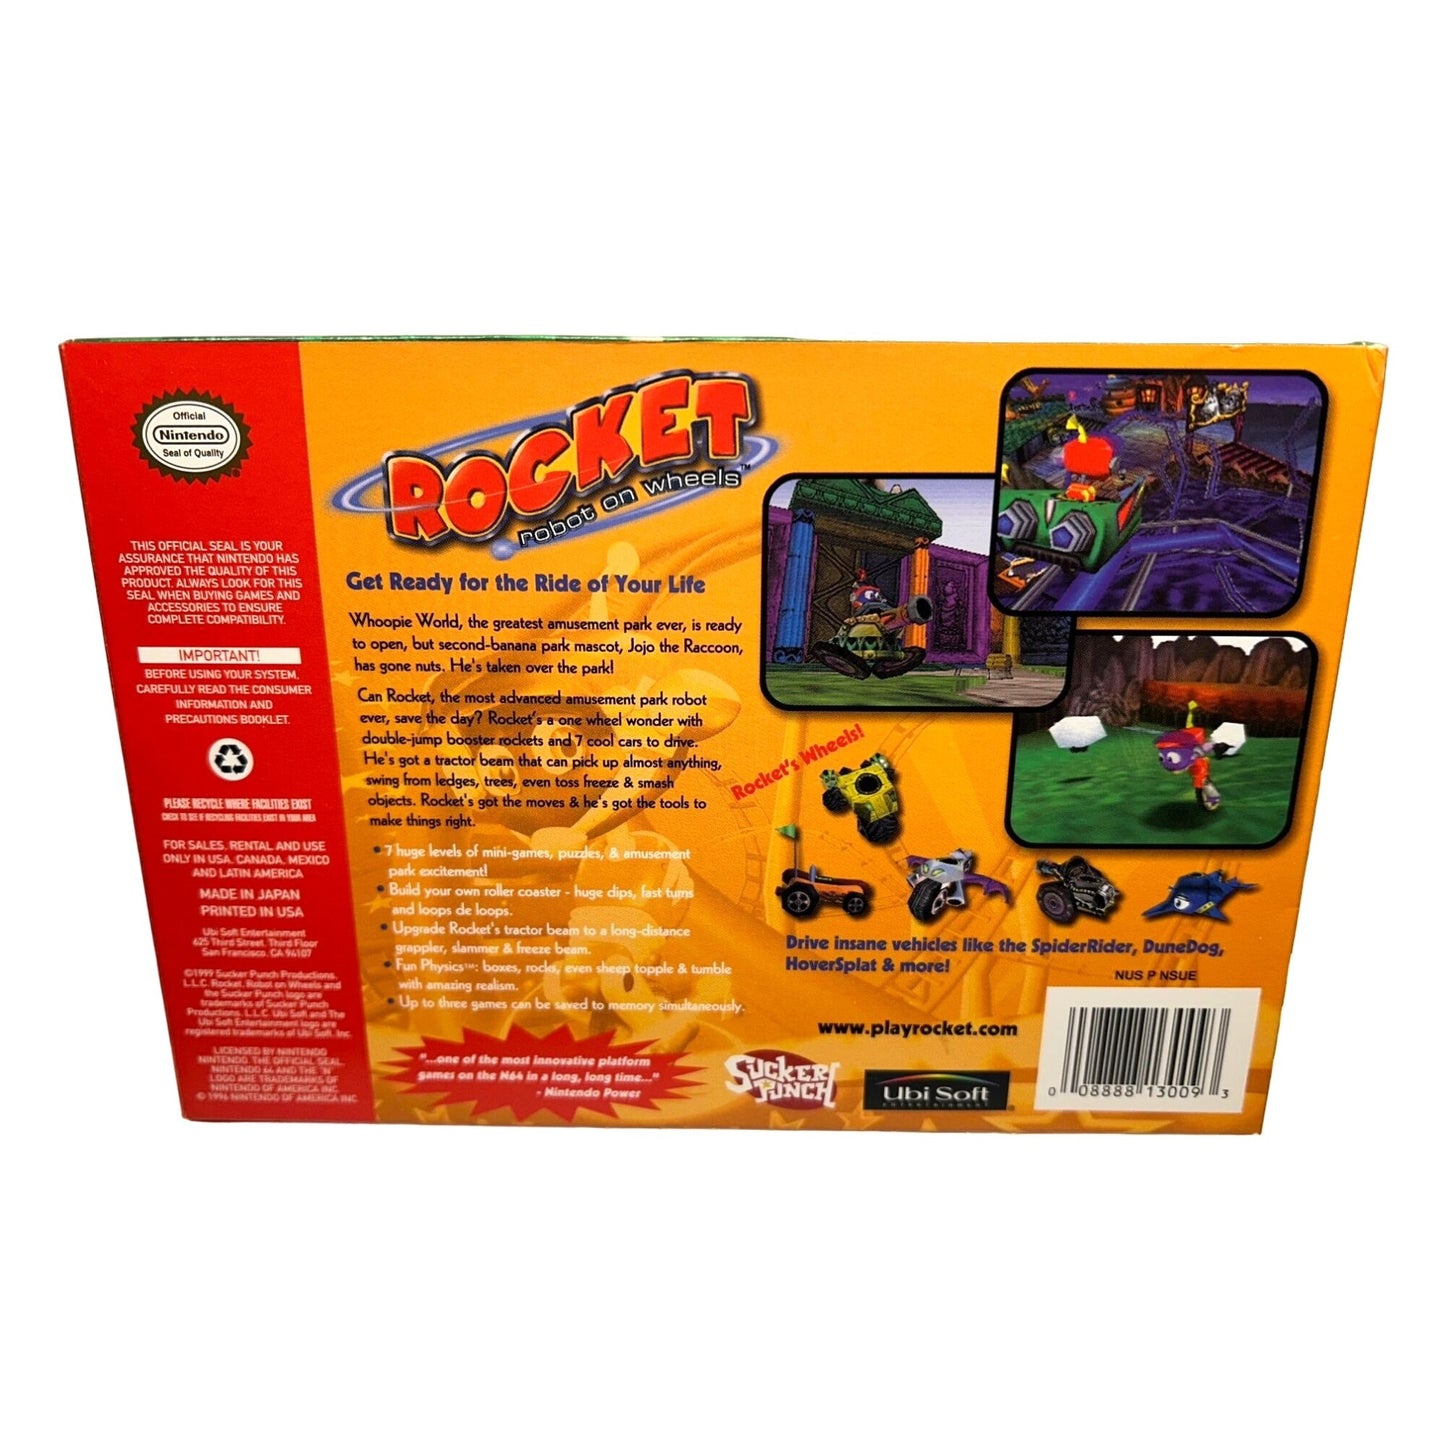 Rocket Robot on Wheels (N64, 1999) CIB Box in Nice Condition Incl. Manual TESTED